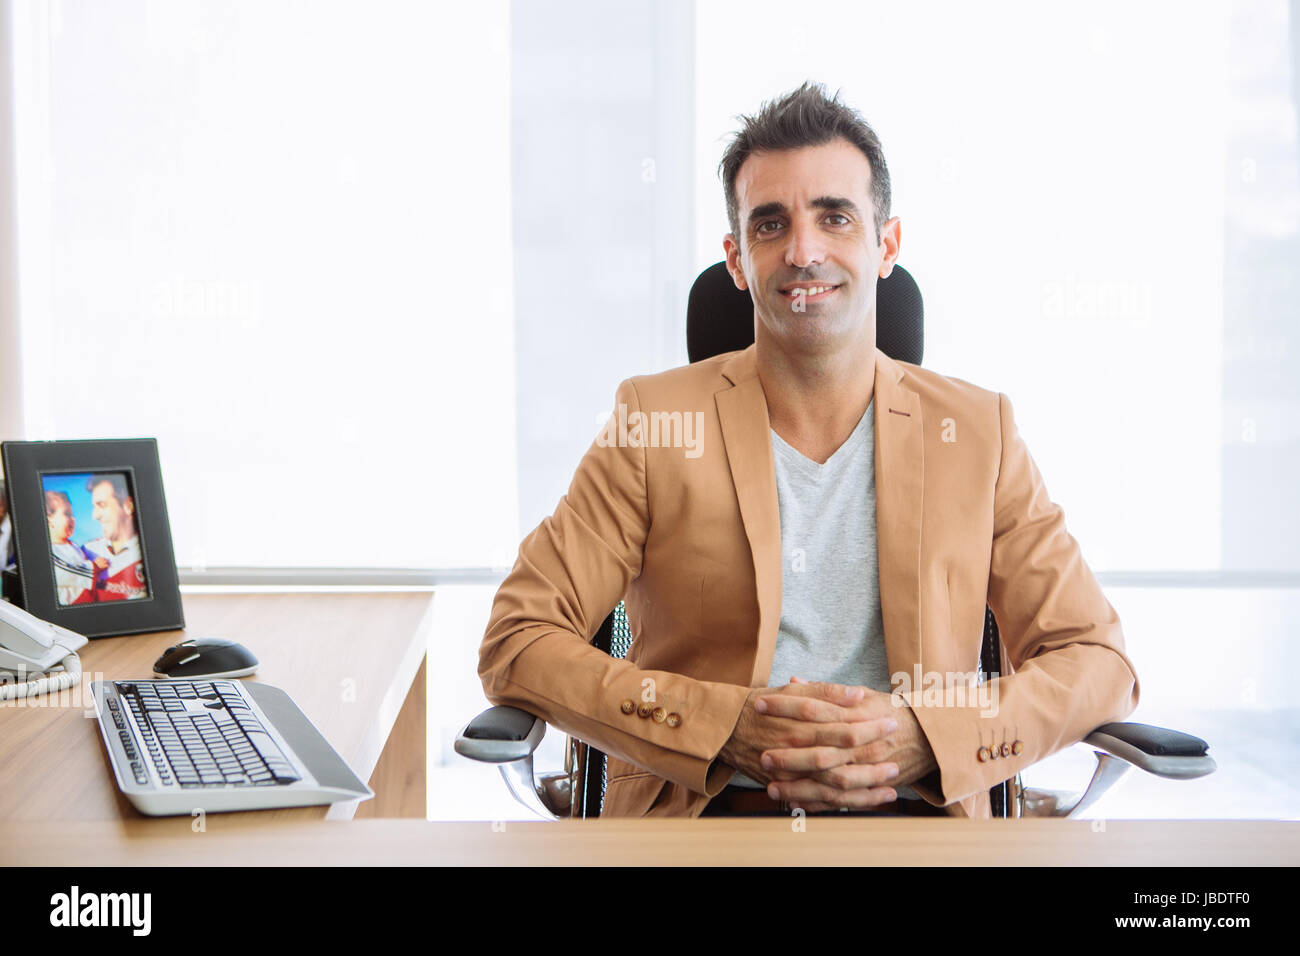 A 35 - 40 years man caucasian dark hair cool modern informal look smiling seating behind a desk in a work station in an office Stock Photo